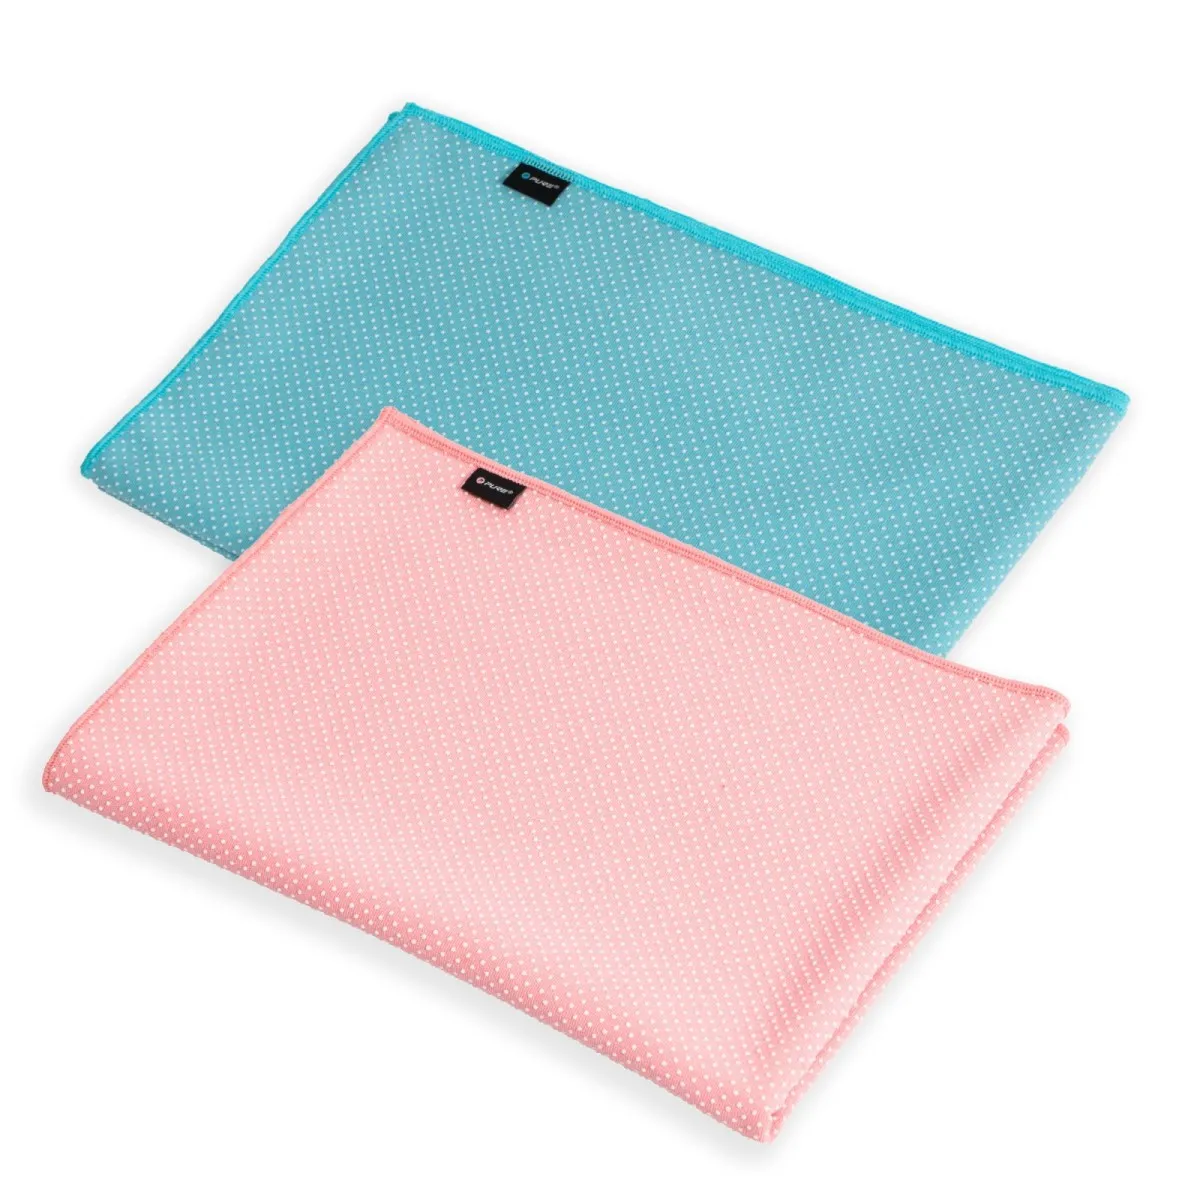 Pure2Improve yoga towel blue and pink